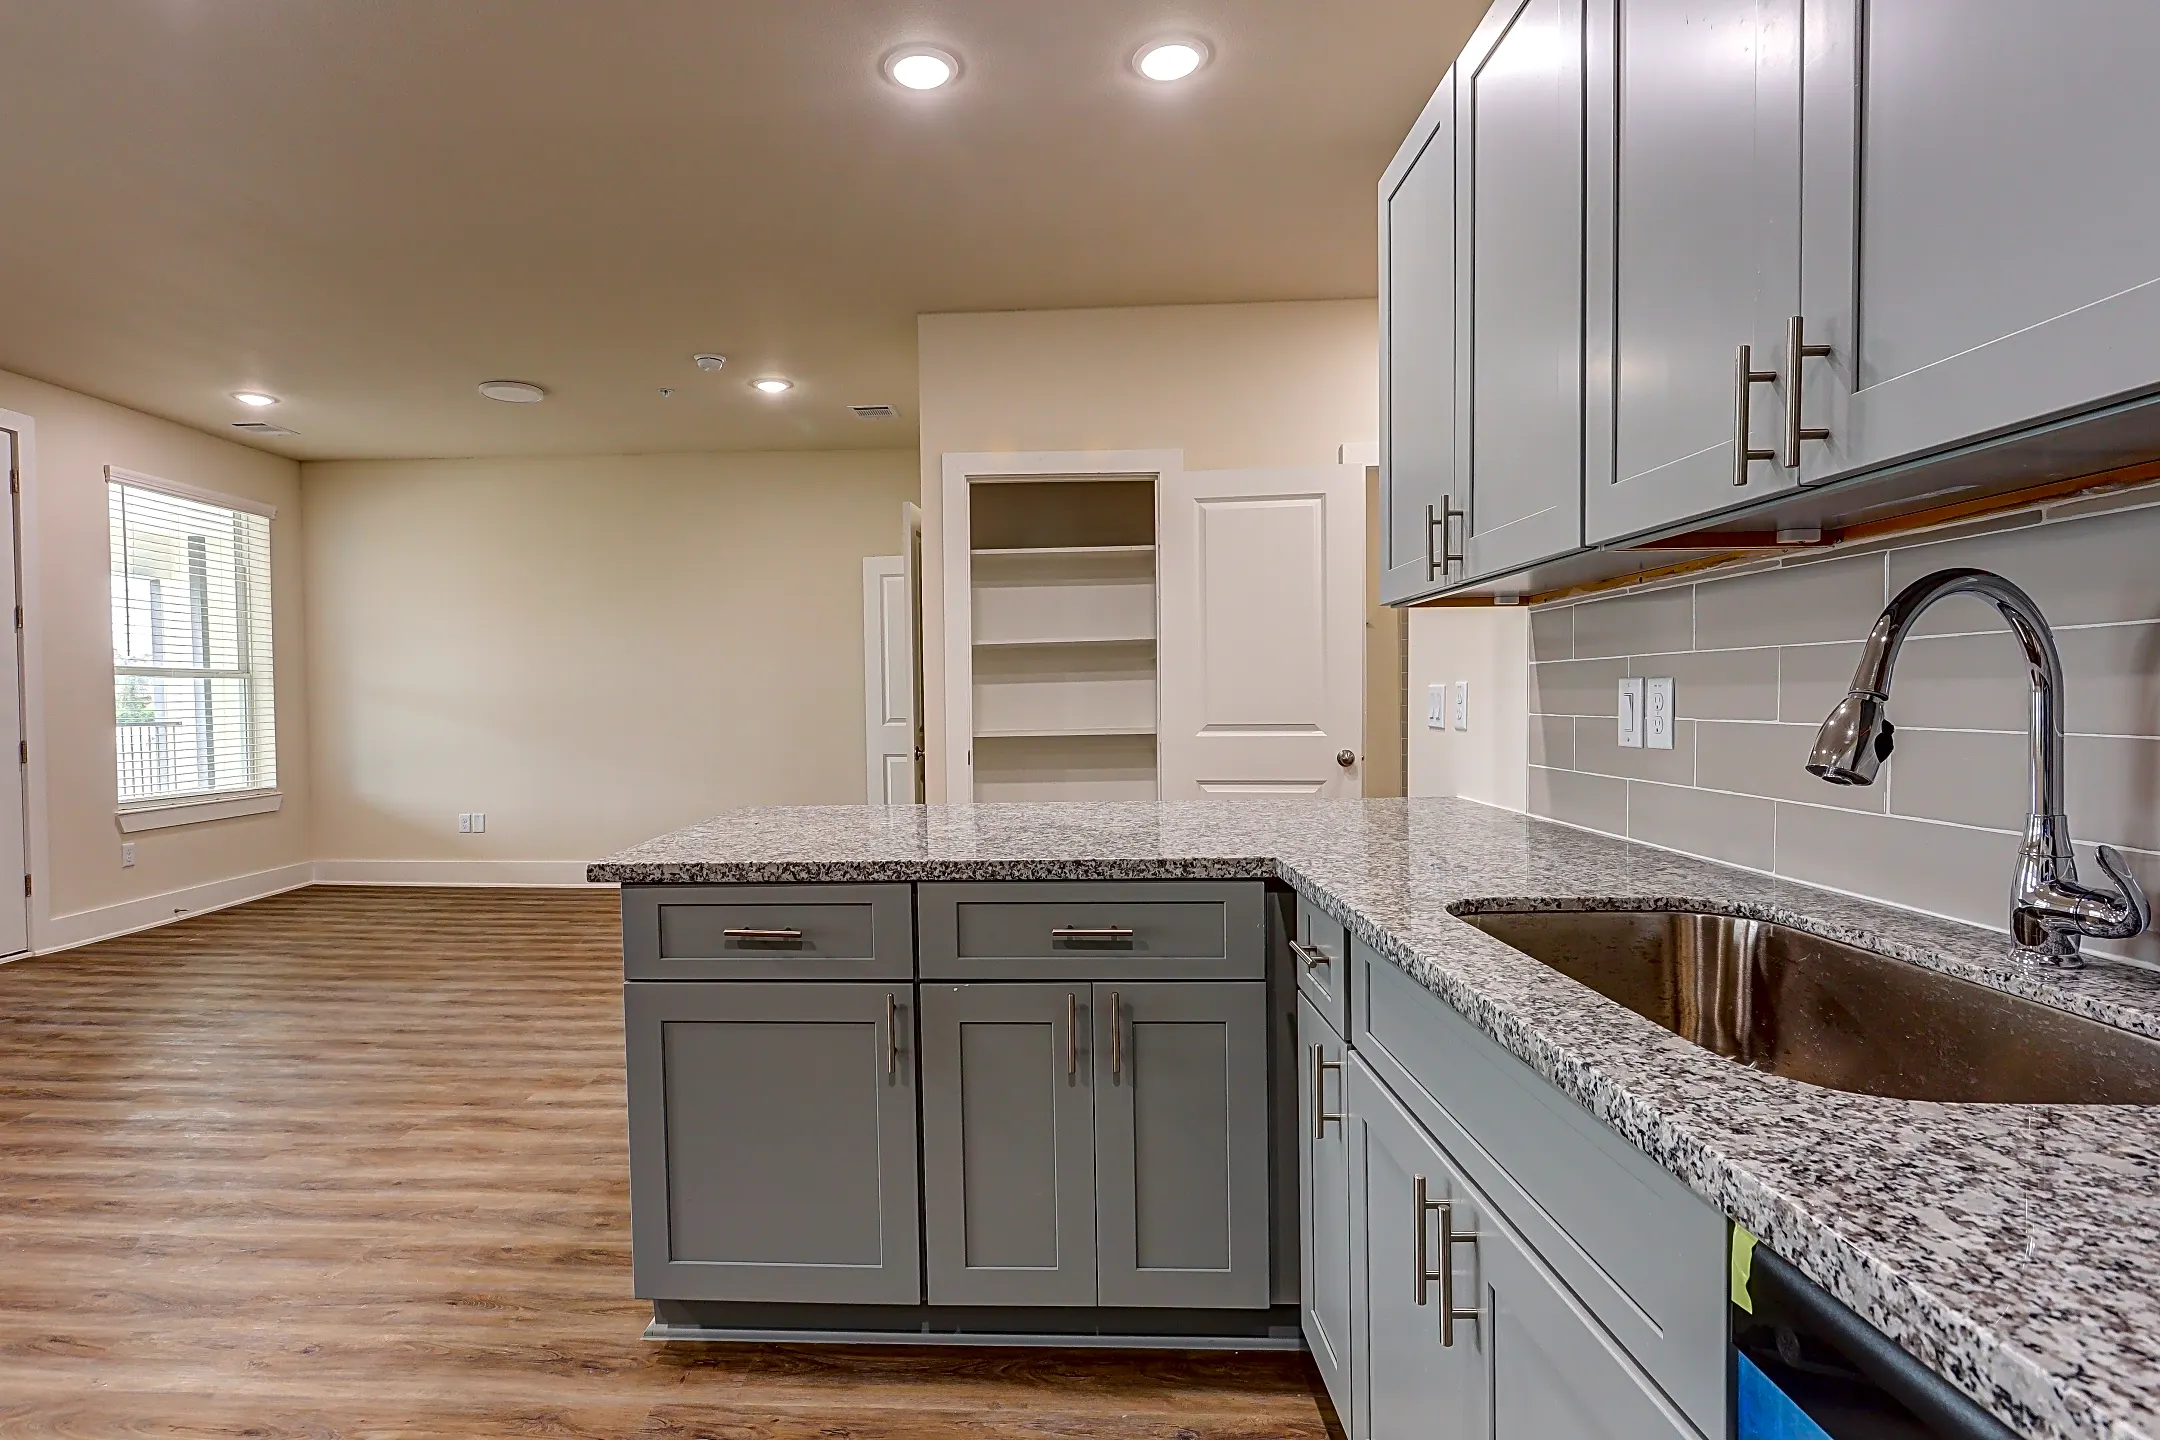 Kitchen - Azul Apartments - The Woodlands - Spring, TX